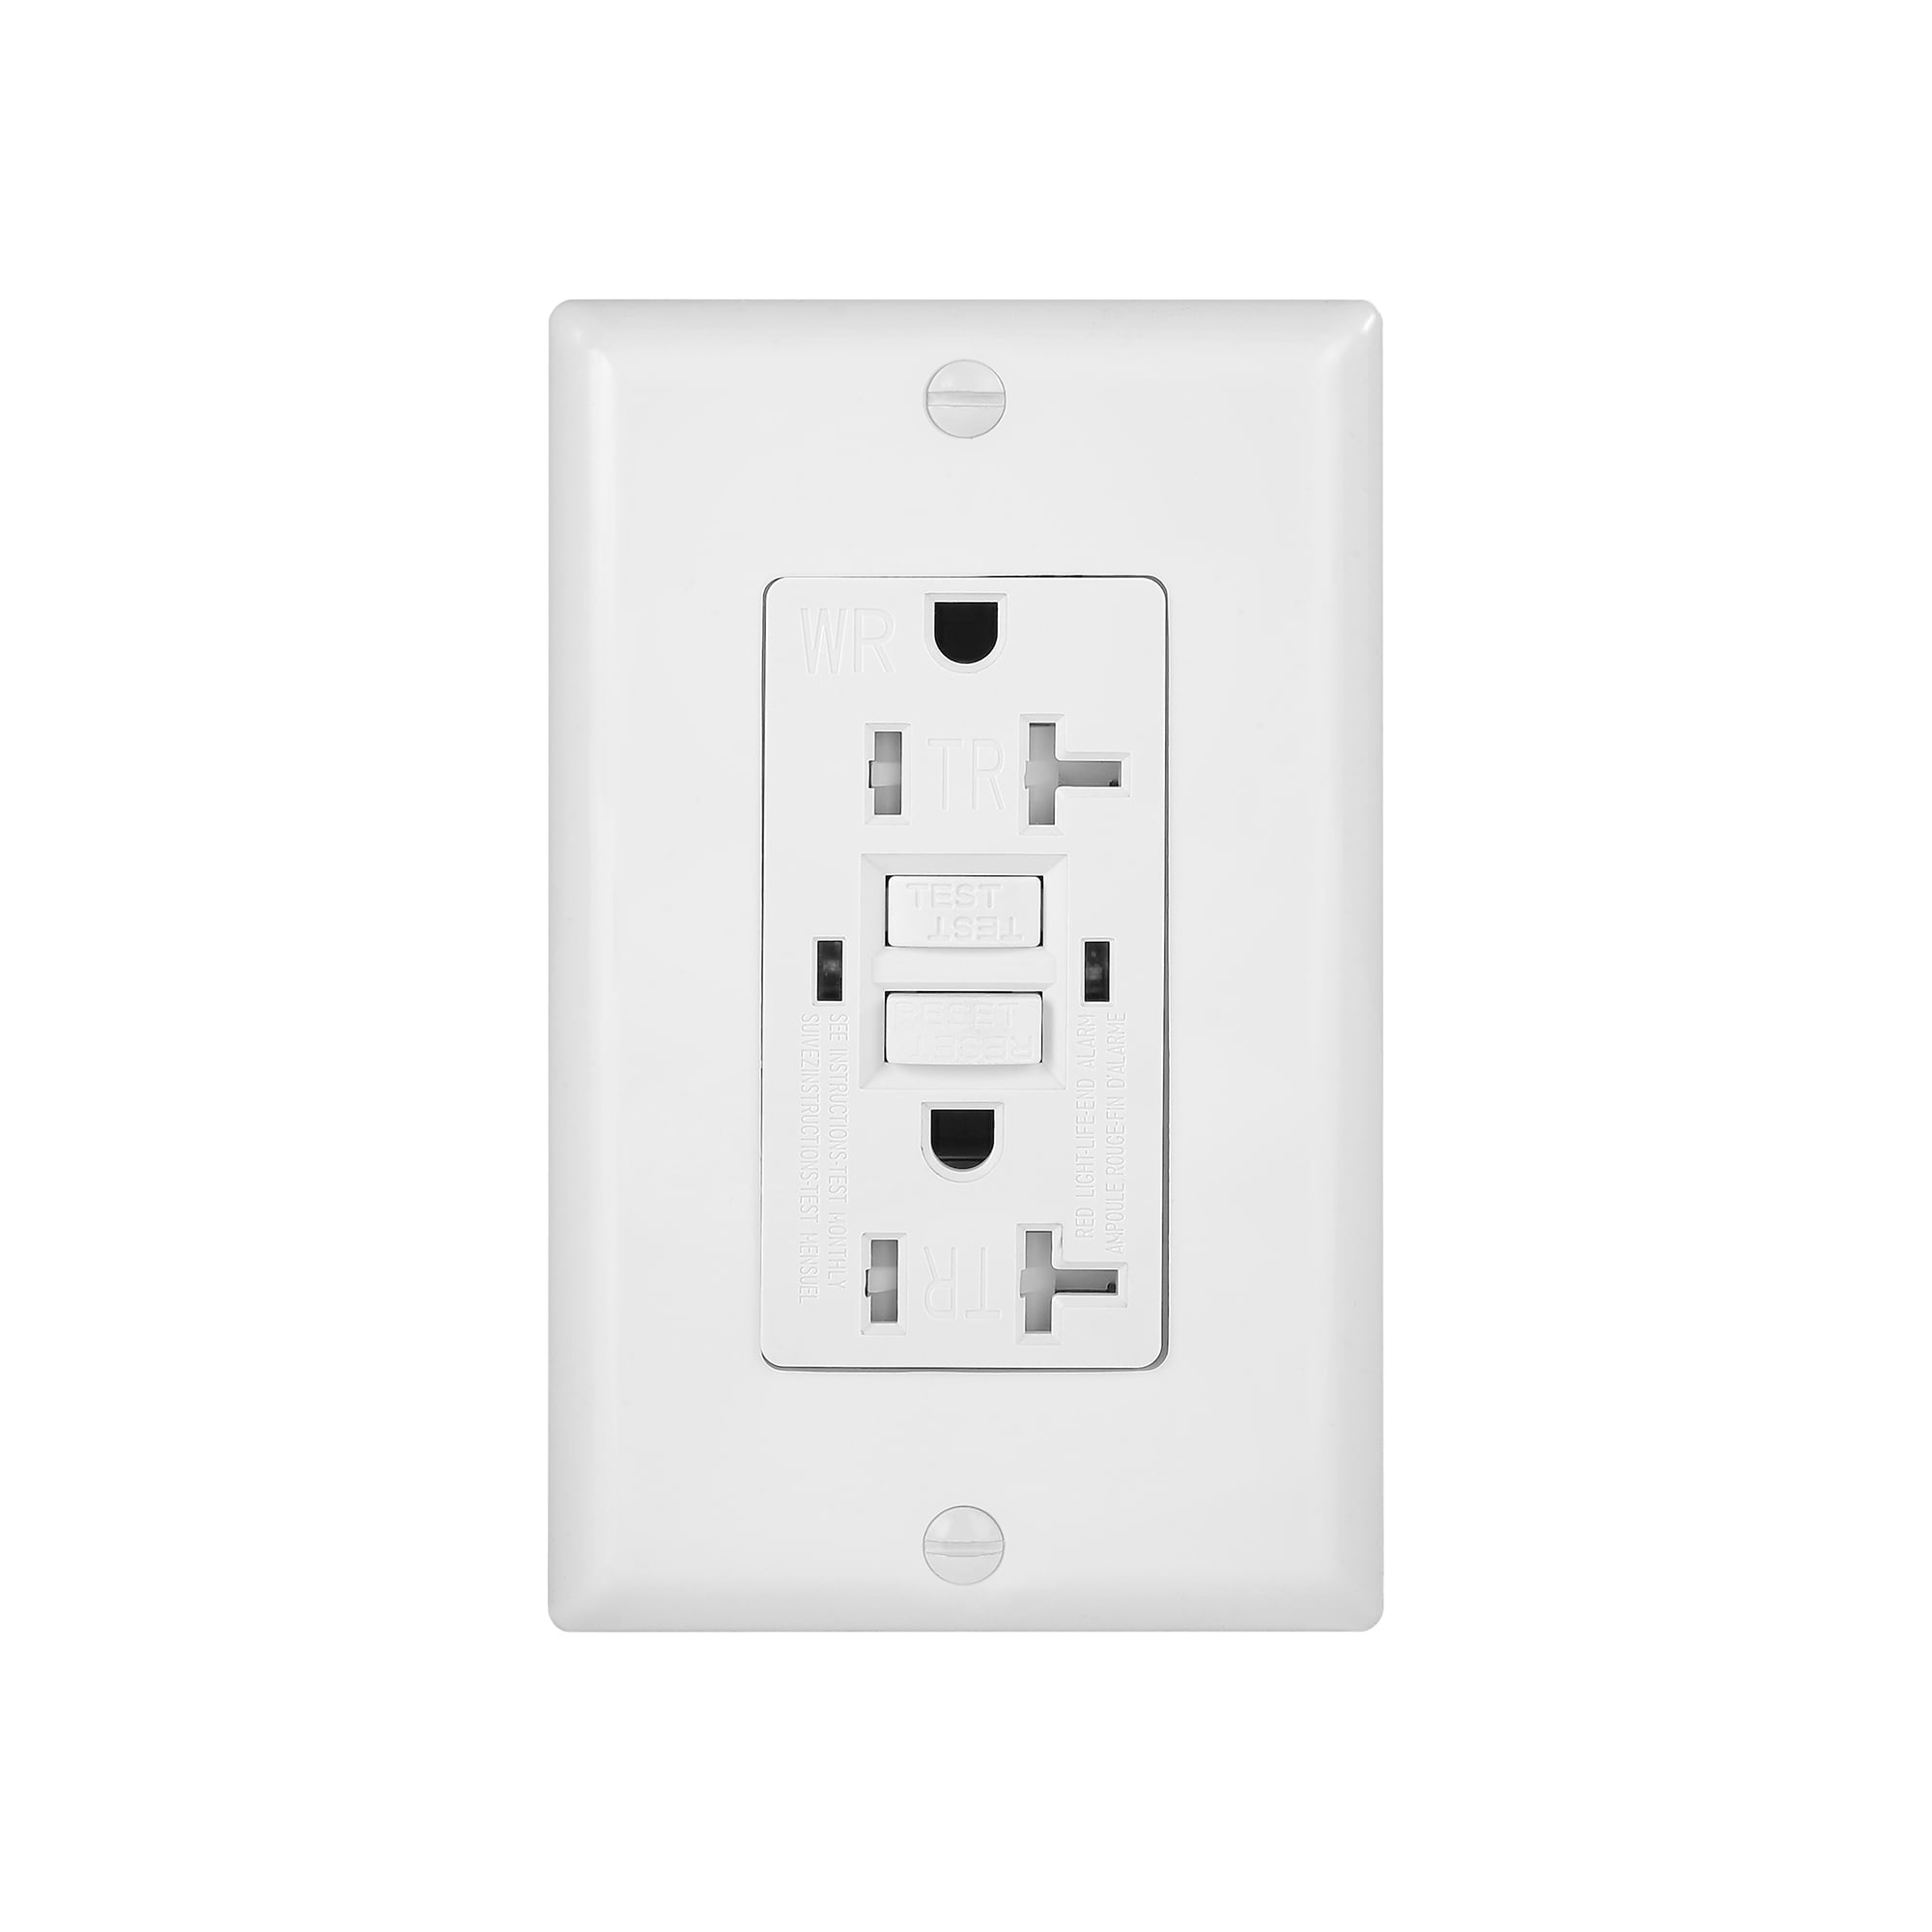 10 Pack Self-Test Function with LED Indicator White Weather Resistant 15-Amp/125-Volt cUL Listed Wall Plate and Screws Included UL Listed GFCI Duplex Outlet Receptacle 